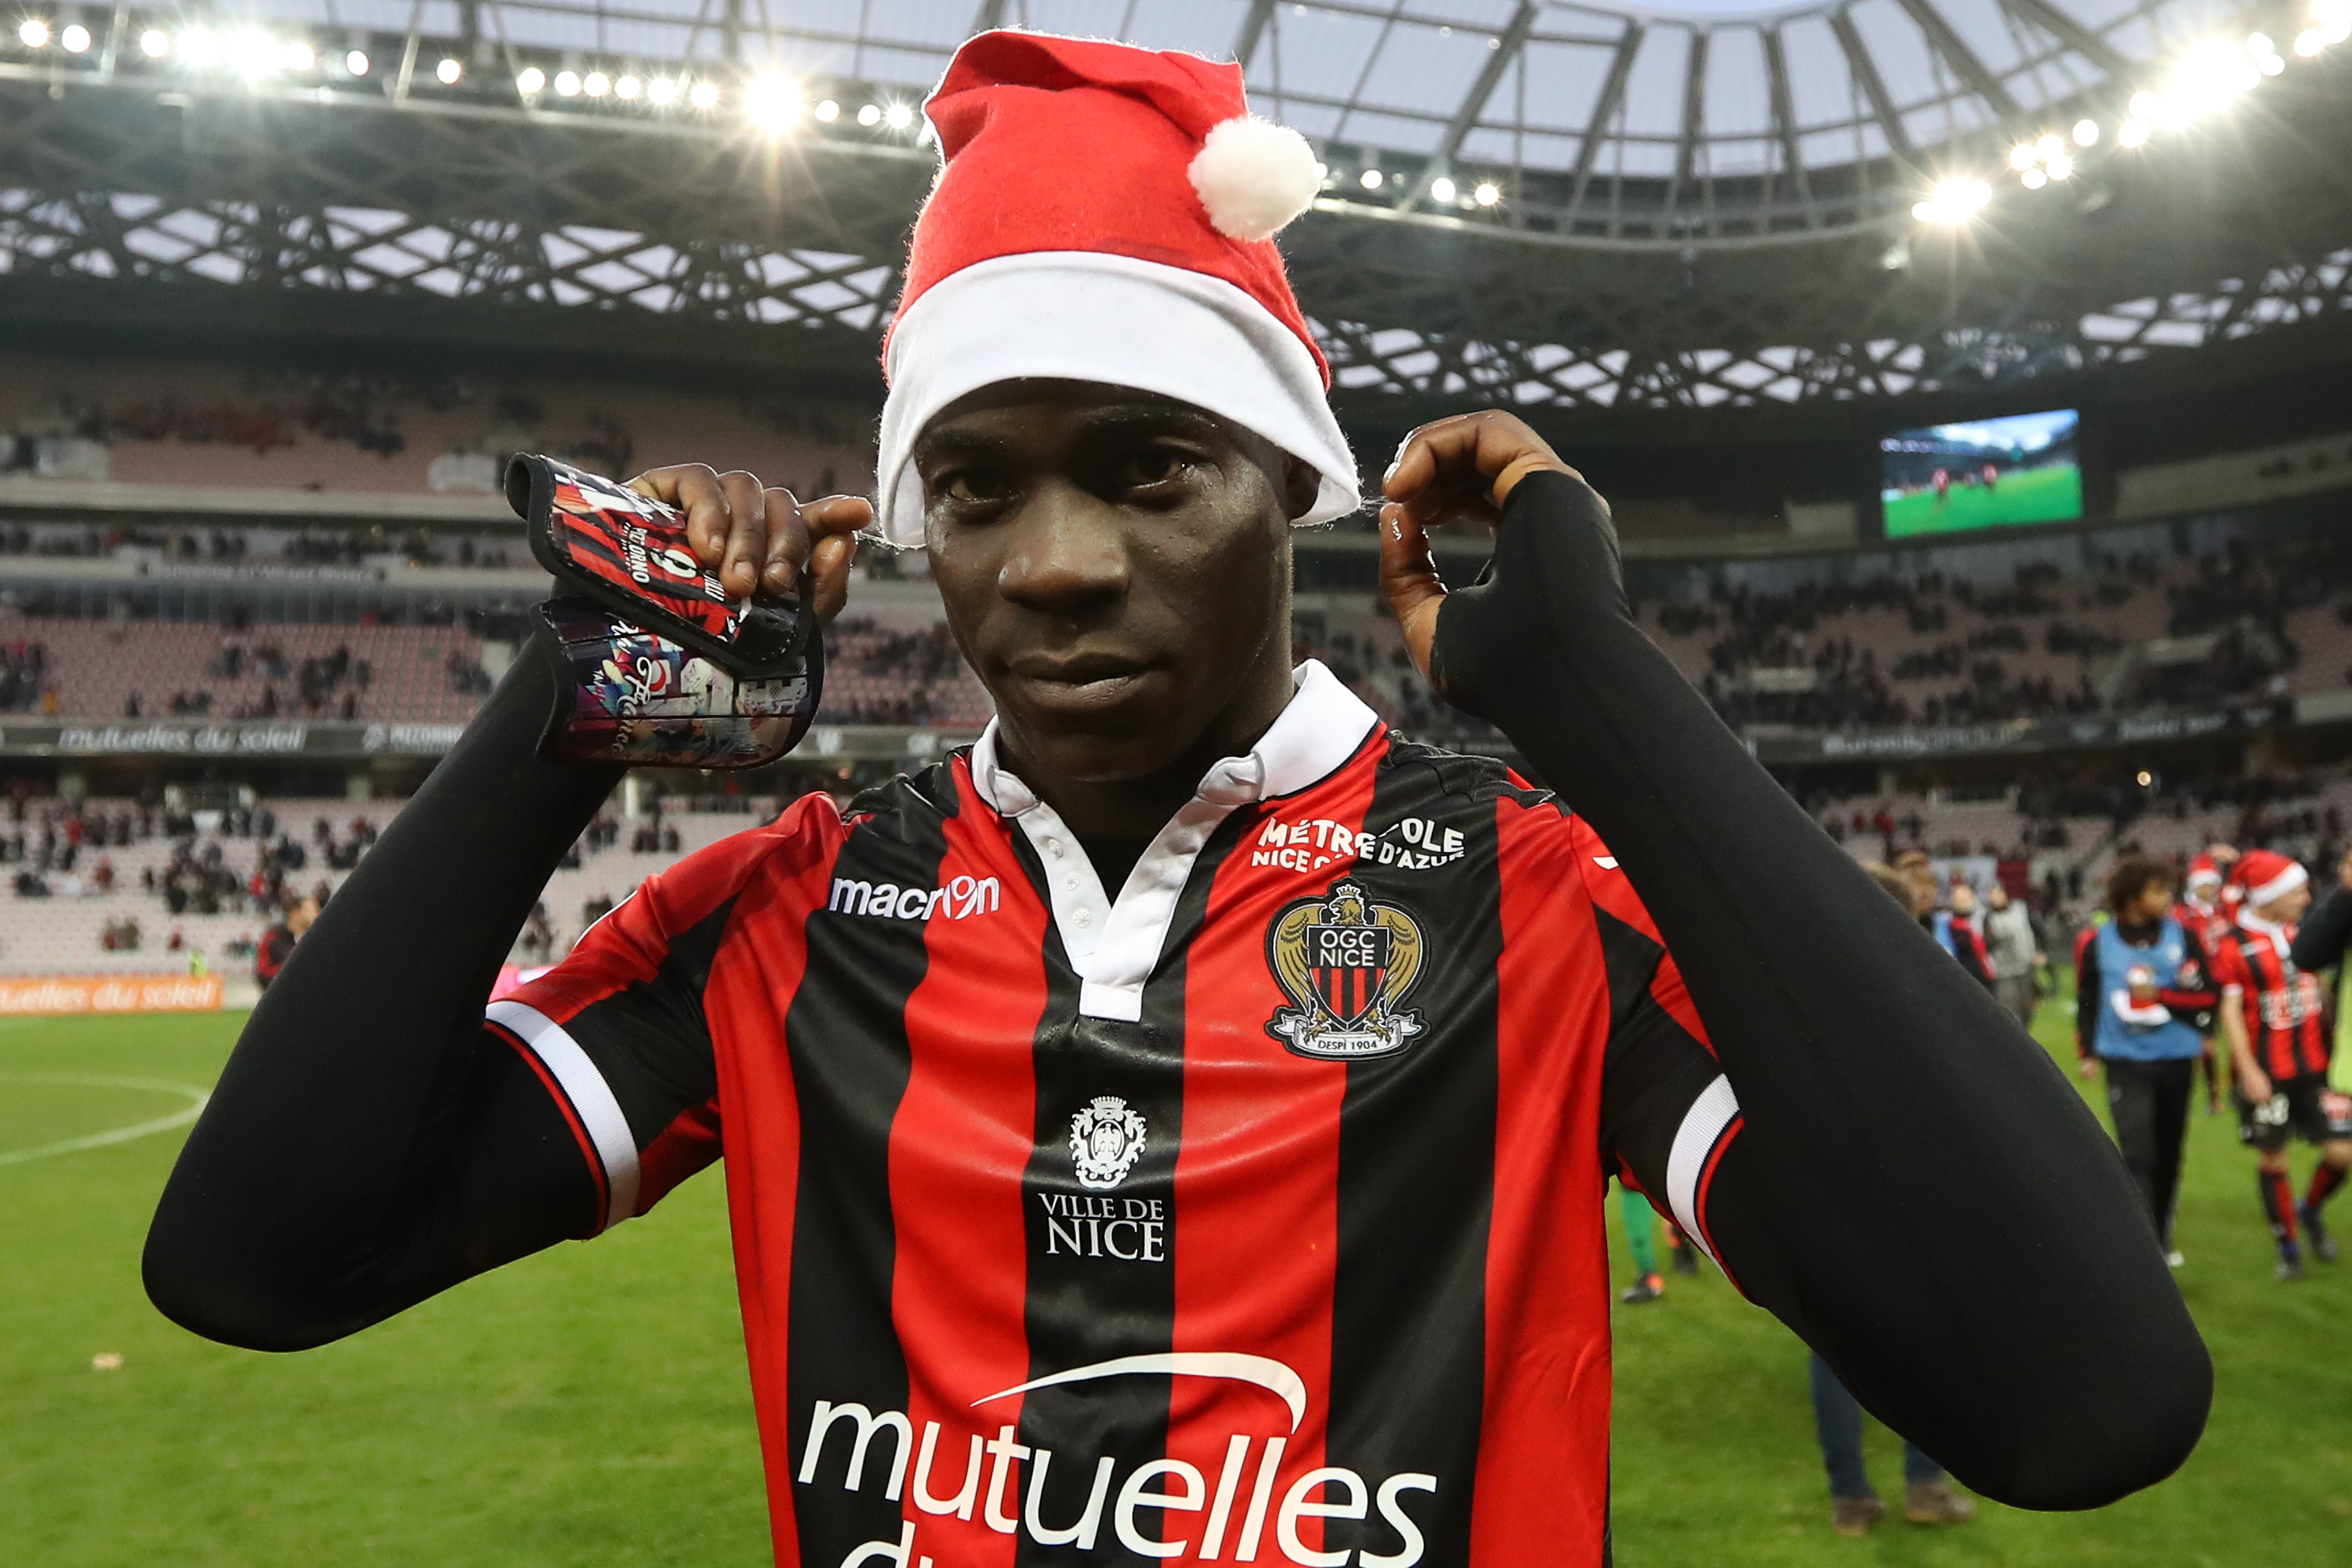 Nice's Italian forward Mario Balotelli, wearing a Santa Claus bonnet, walks on the pitch at the end of the French L1 football match Nice (OGCN) vs Dijon (DFCO) on December 18, 2016 at the Allianz Riviera stadium in Nice, southeastern France.  / AFP / VALERY HACHE        (Photo credit should read VALERY HACHE/AFP/Getty Images)